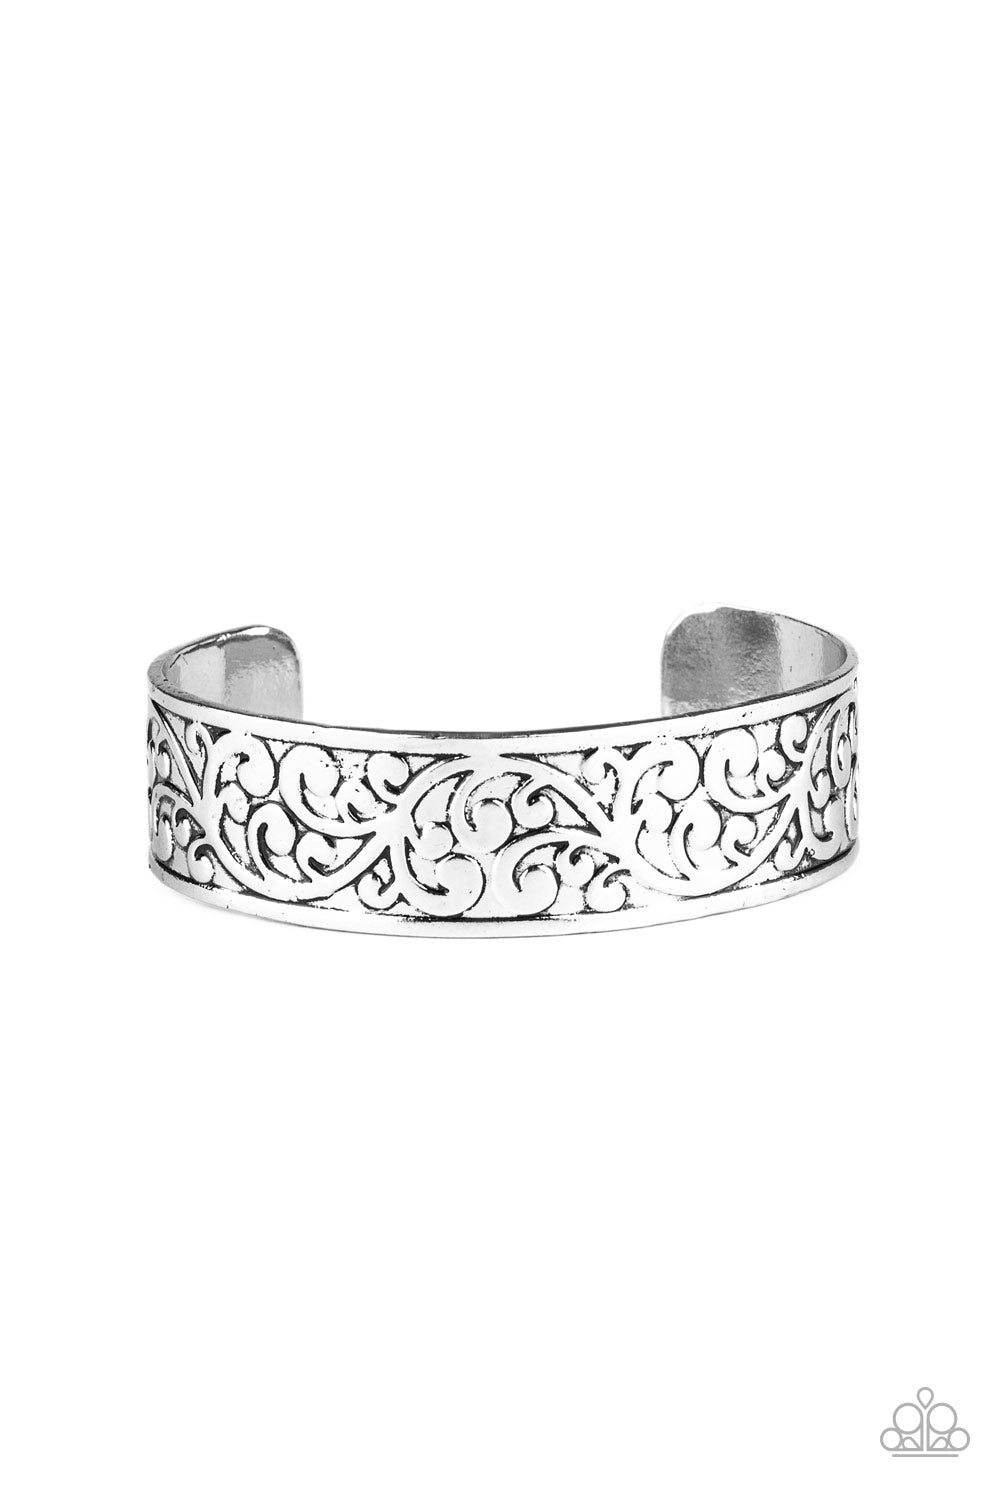 Brushed in an antiqued shimmer, vine-like filigree is embossed across the front of the a thick silver cuff for a whimsical look.